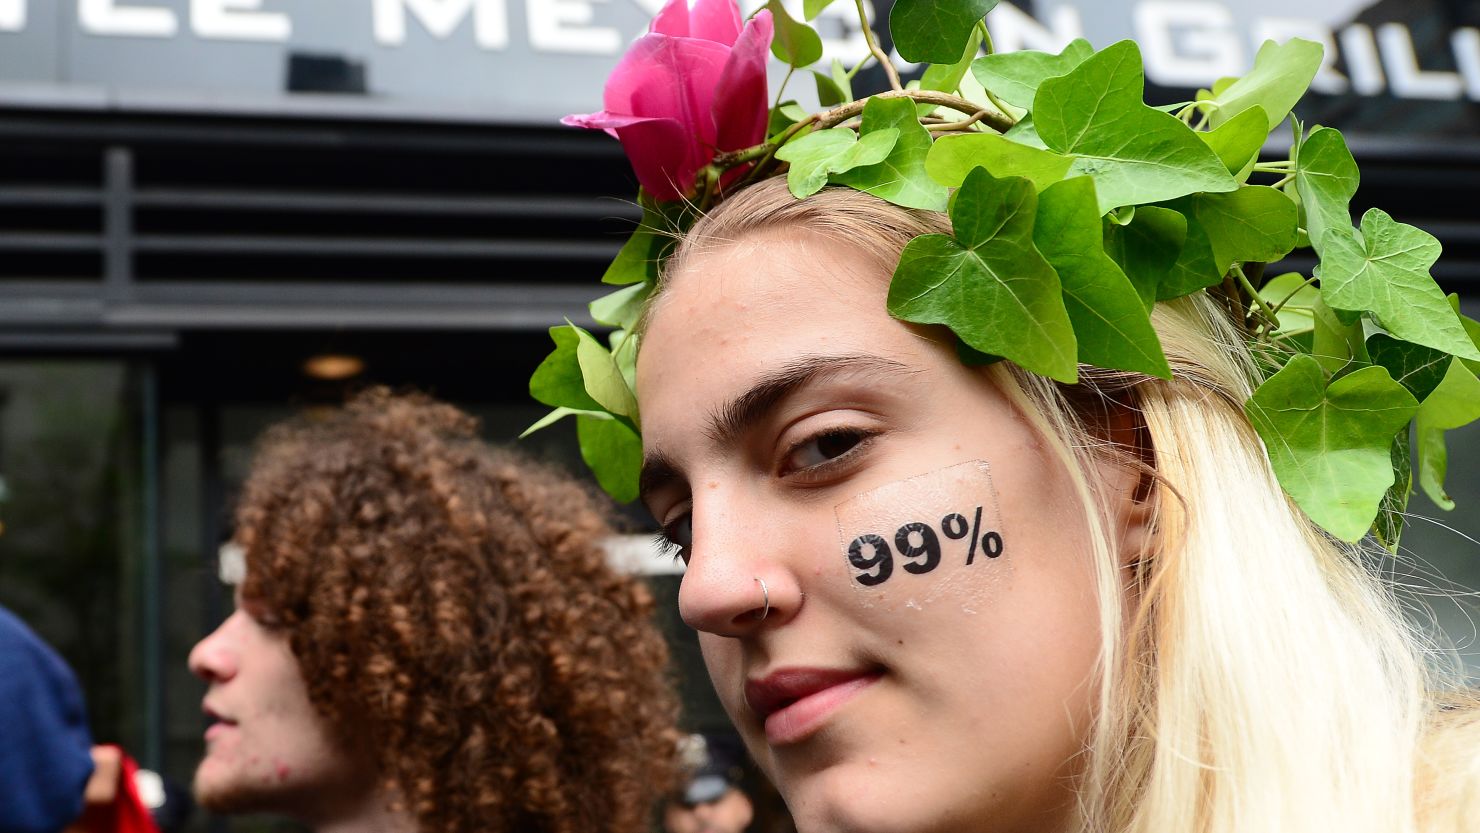 Occupy Wall Street participants stage a march as part of May Day celebrations in New York 